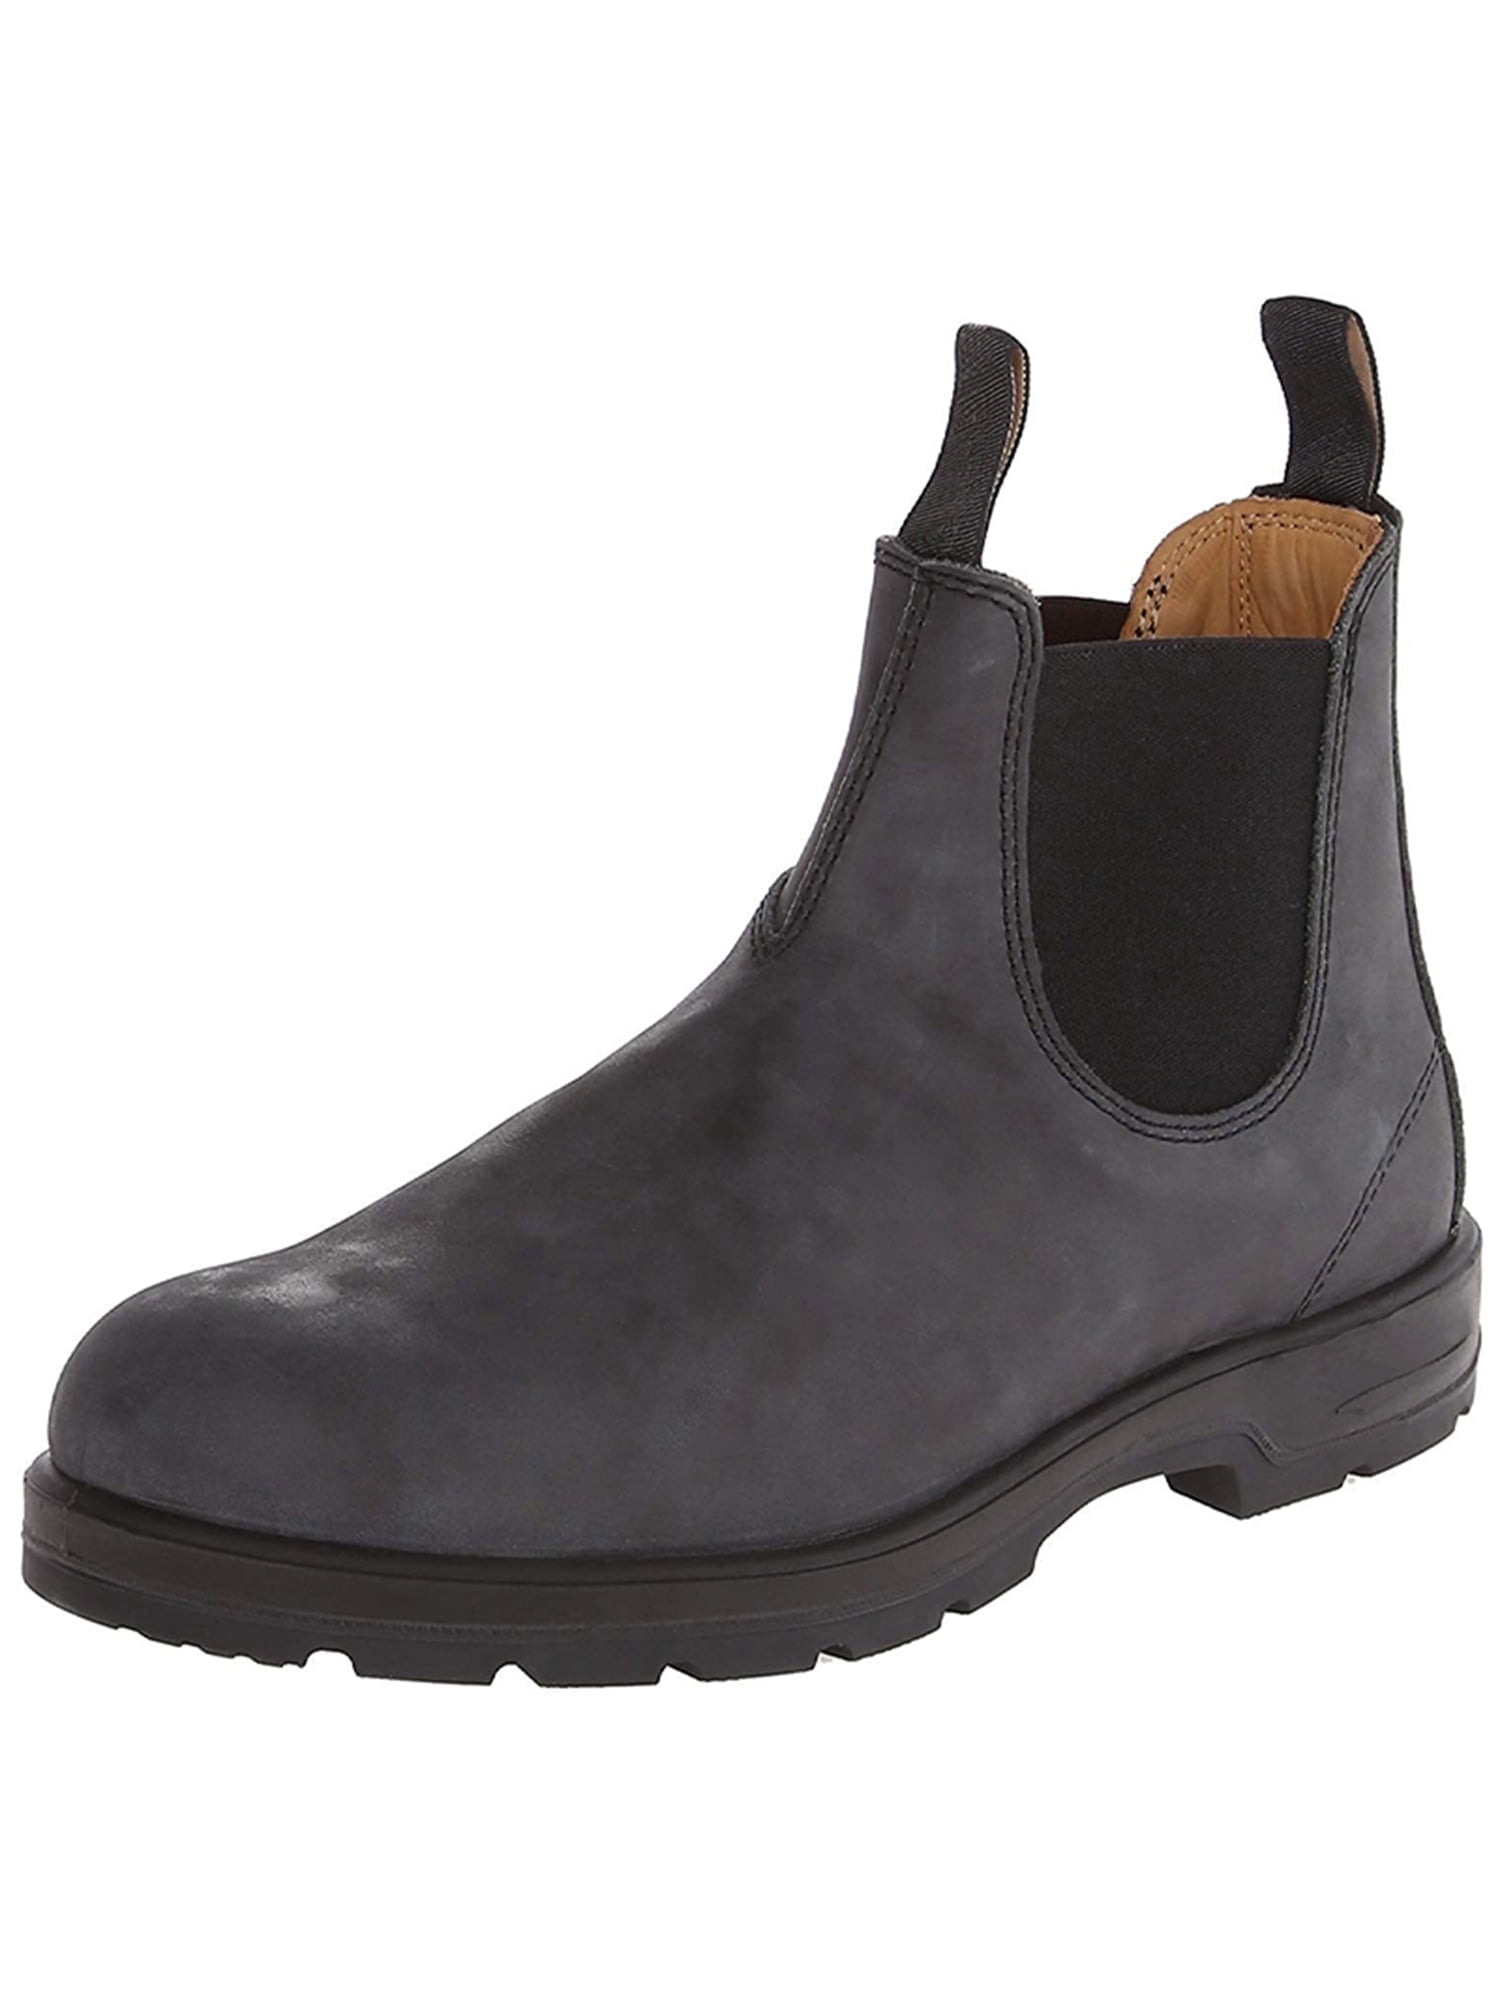 Chelsea Boots for Men Casual Oxfords Work Shoes Gray - Walmart.com